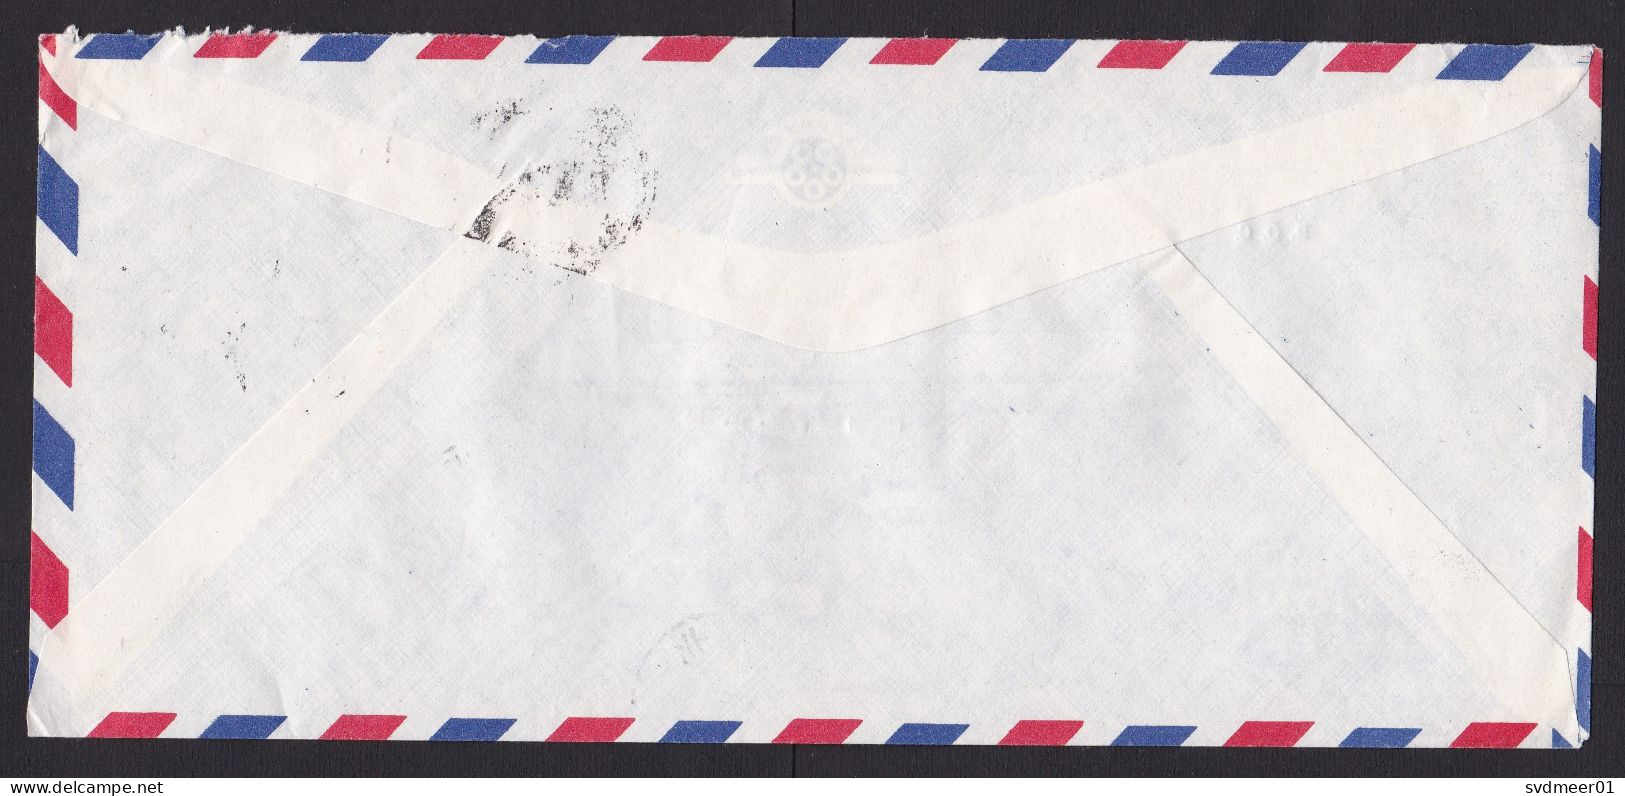 Taiwan: Airmail Cover To Netherlands, 1987, 5 Stamps, Flag, Children Drawing, Child Playing (traces Of Use) - Covers & Documents